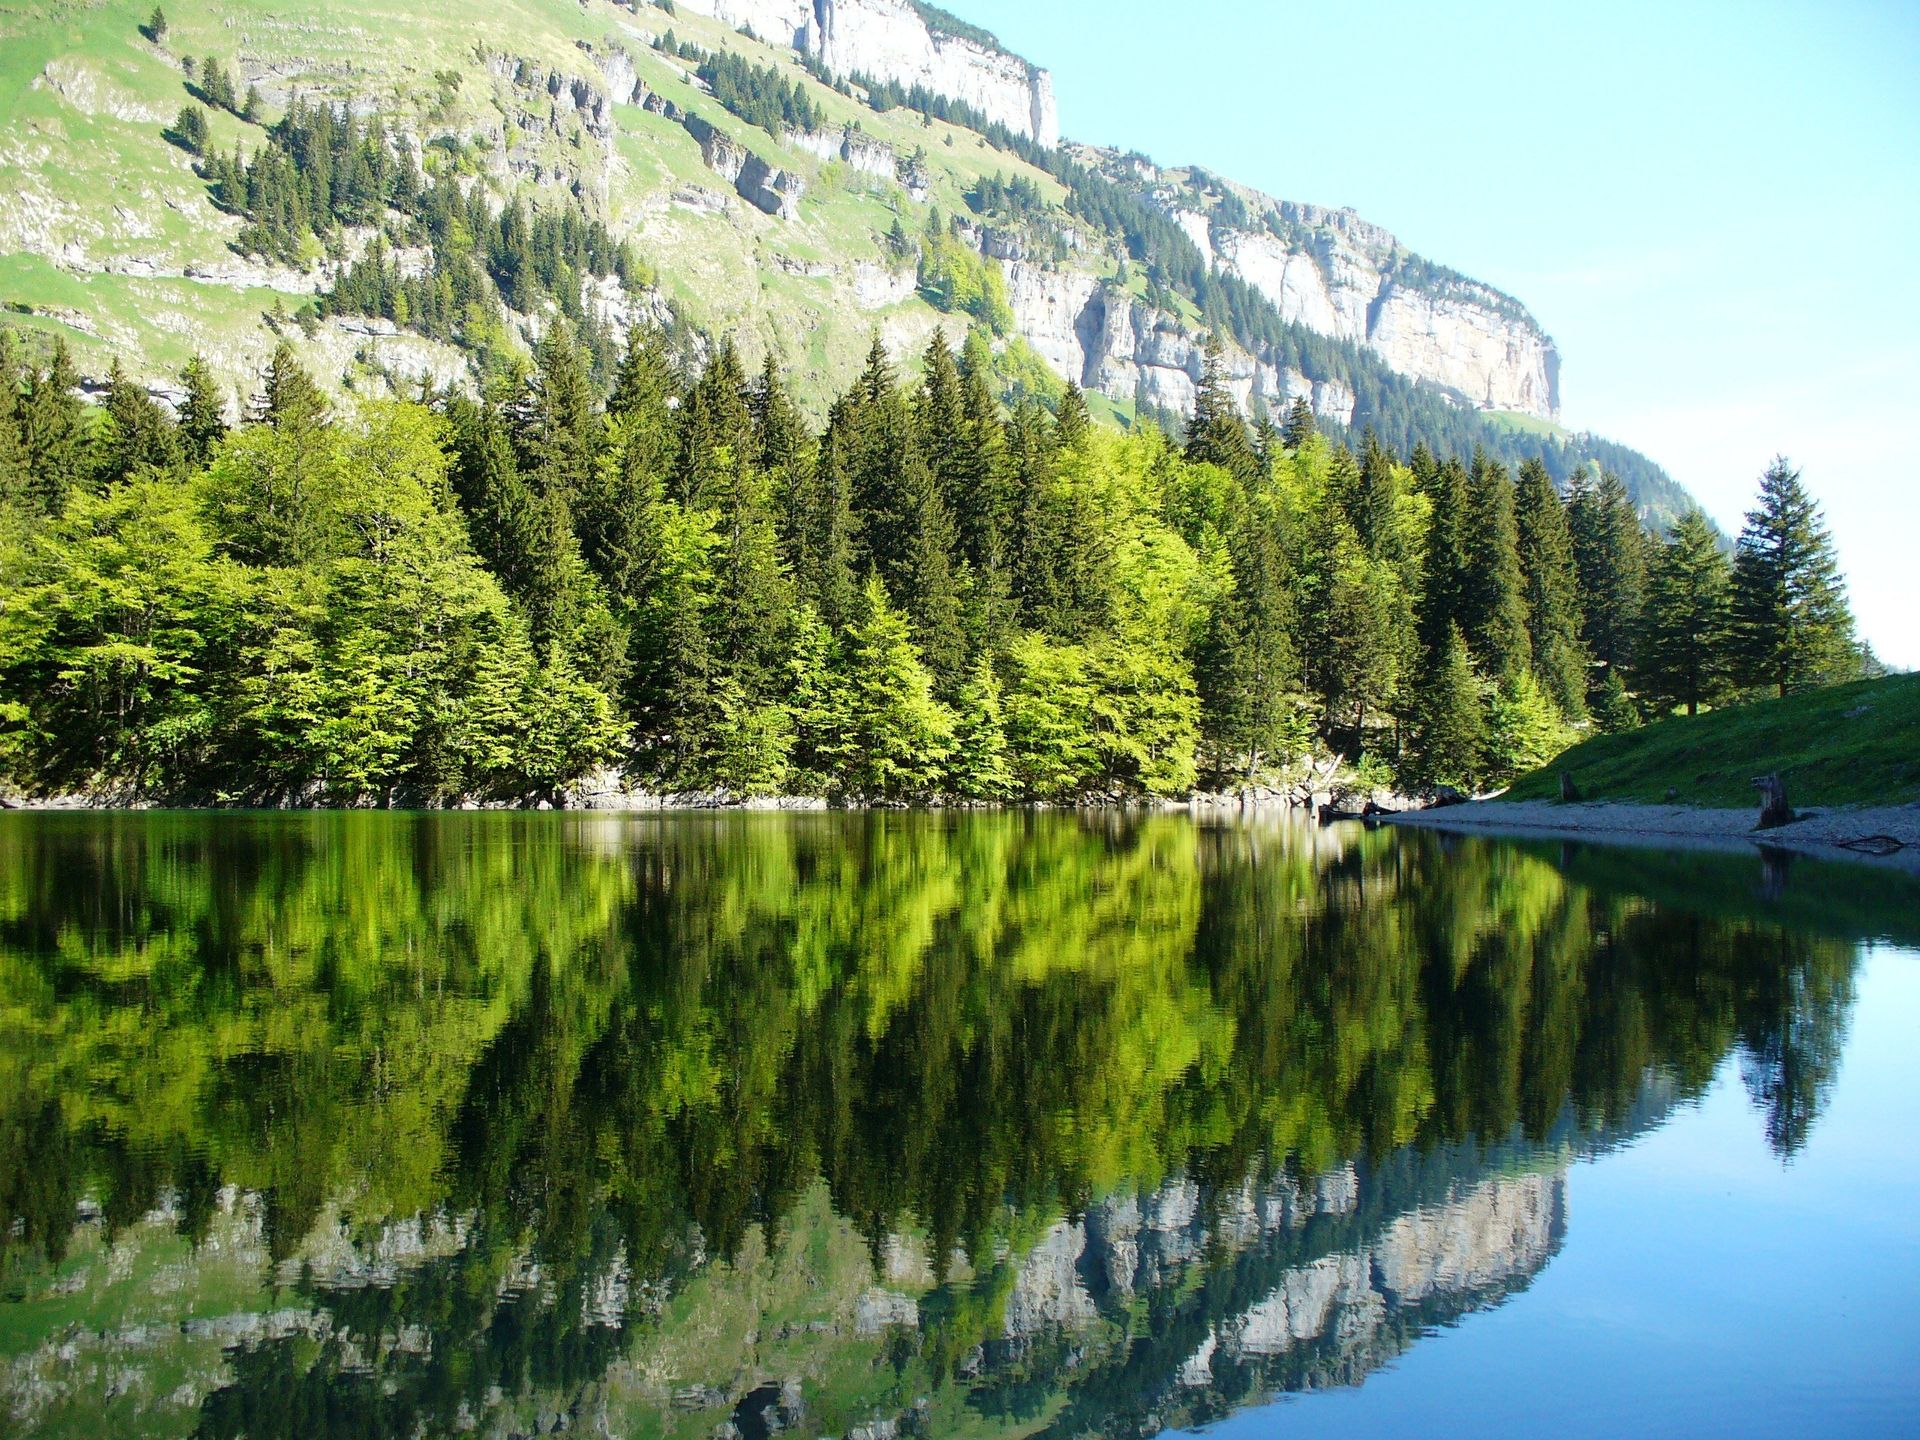 A mountain and pine trees are reflected in the lake.